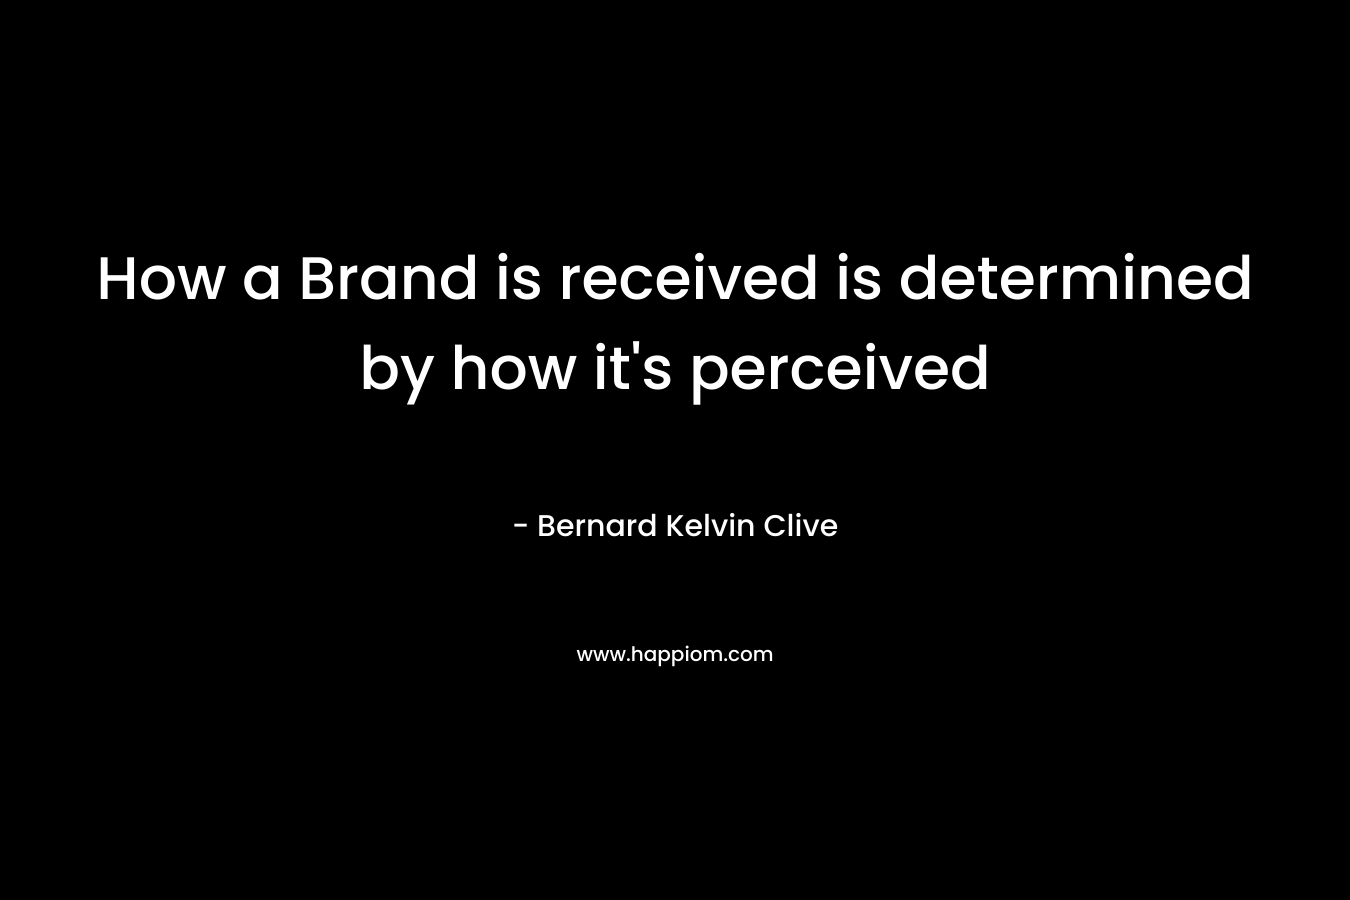 How a Brand is received is determined by how it's perceived